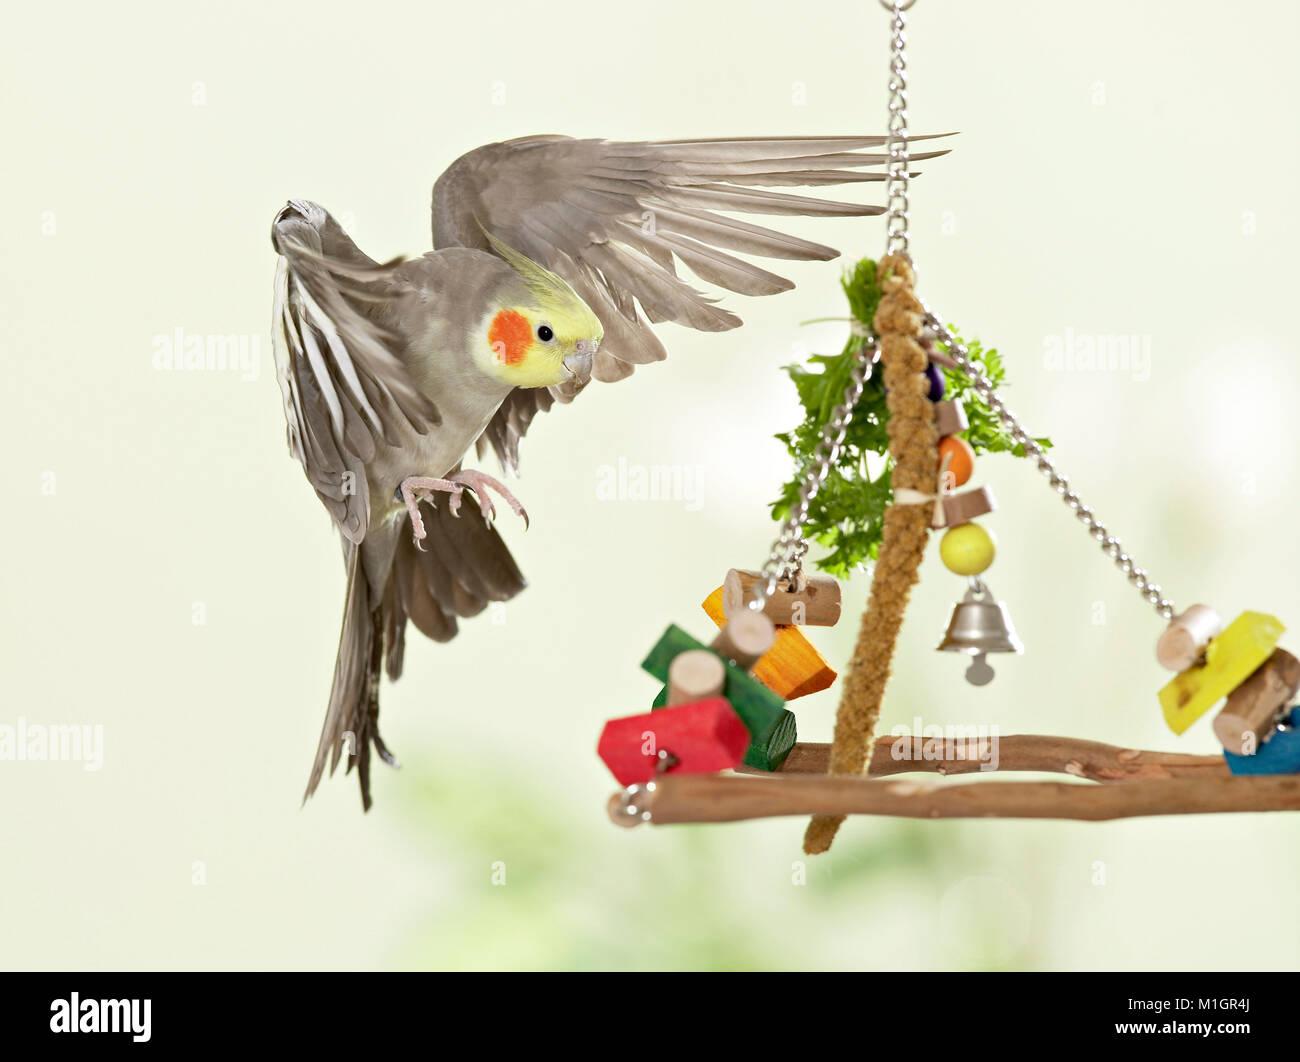 Cockatiel. Adult in landing approach to twig with toys and food. Germany. Stock Photo